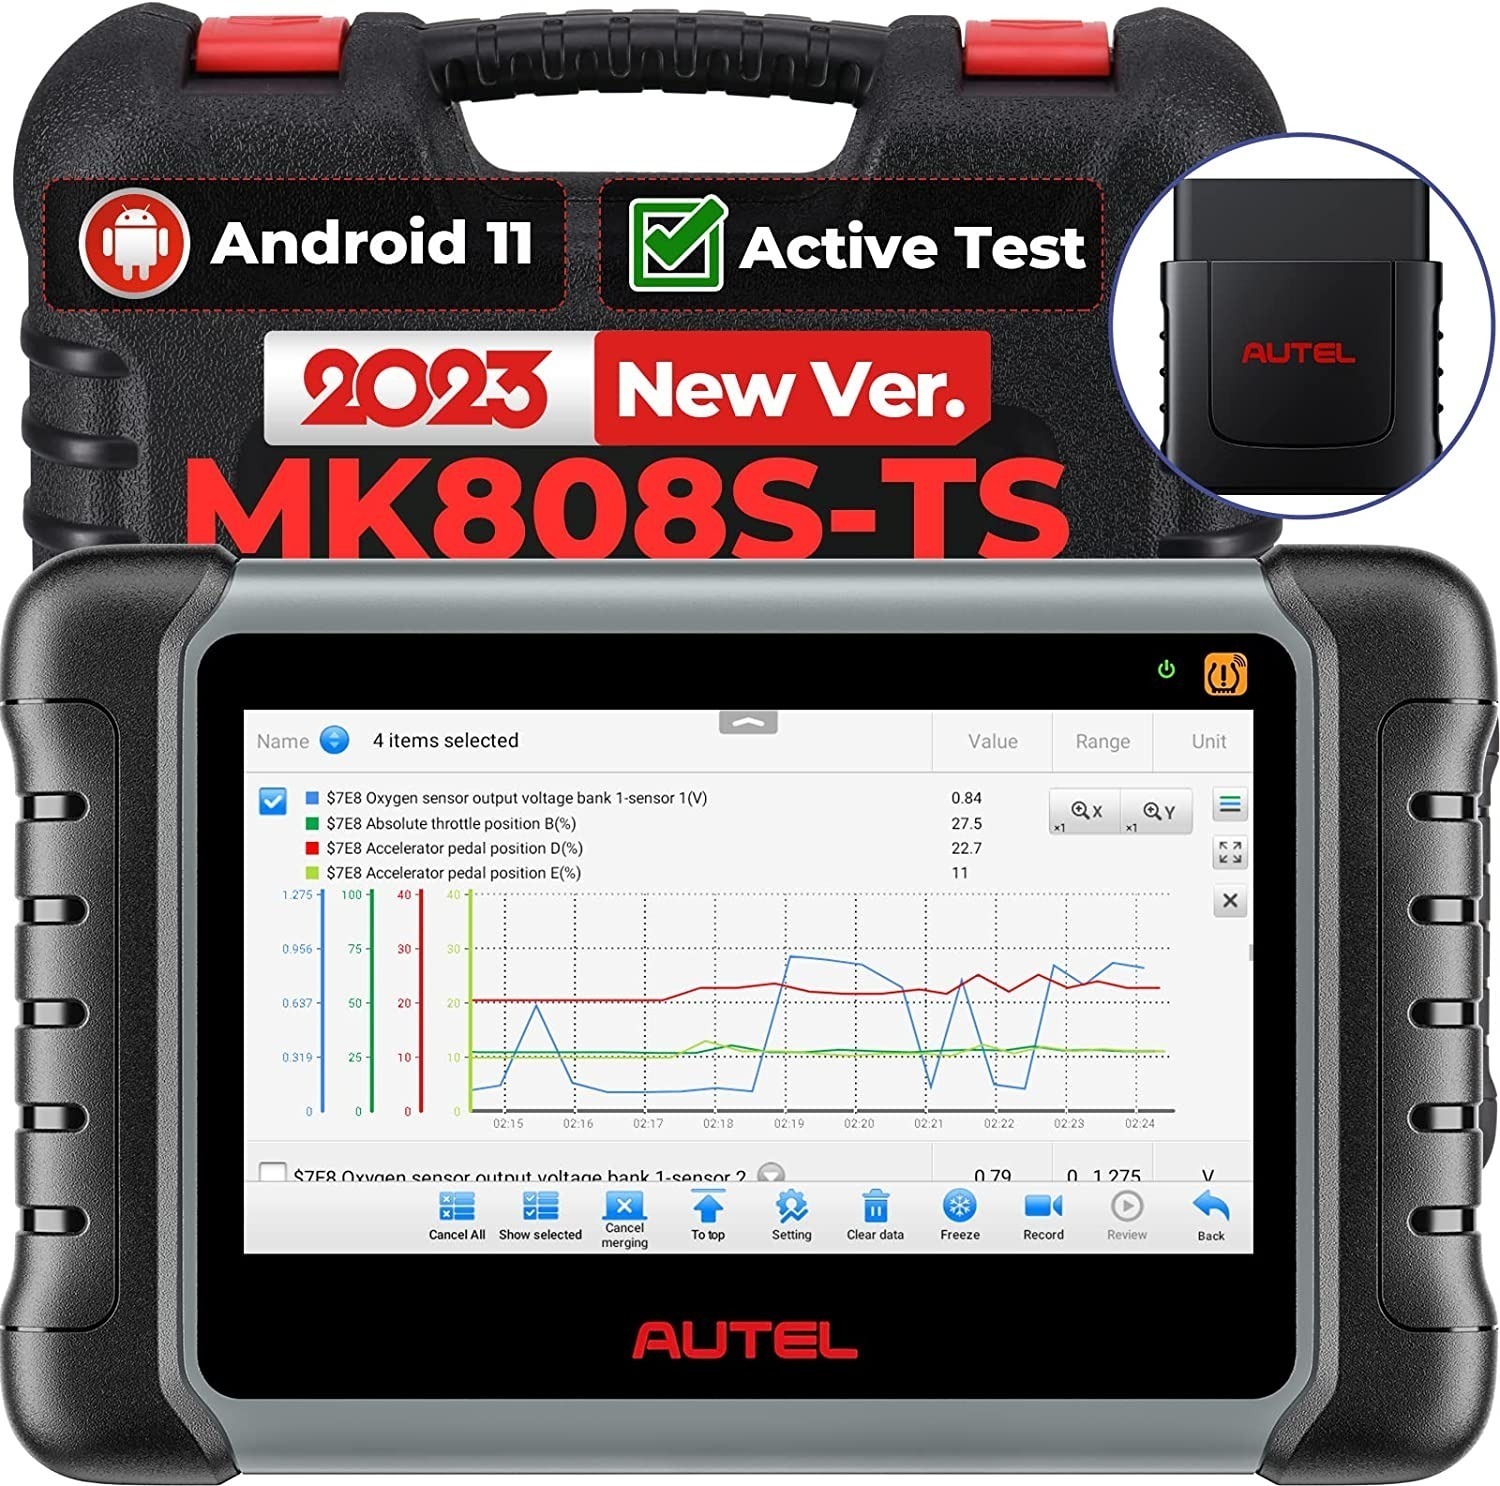 Autel MaxiCOM MK808S-TS TPMS Scanner (2023 Ver.) OBD2 Bidirectional Tool w/ Android 11, 4+64G, 5G WiFi $488.23 + Free Shipping